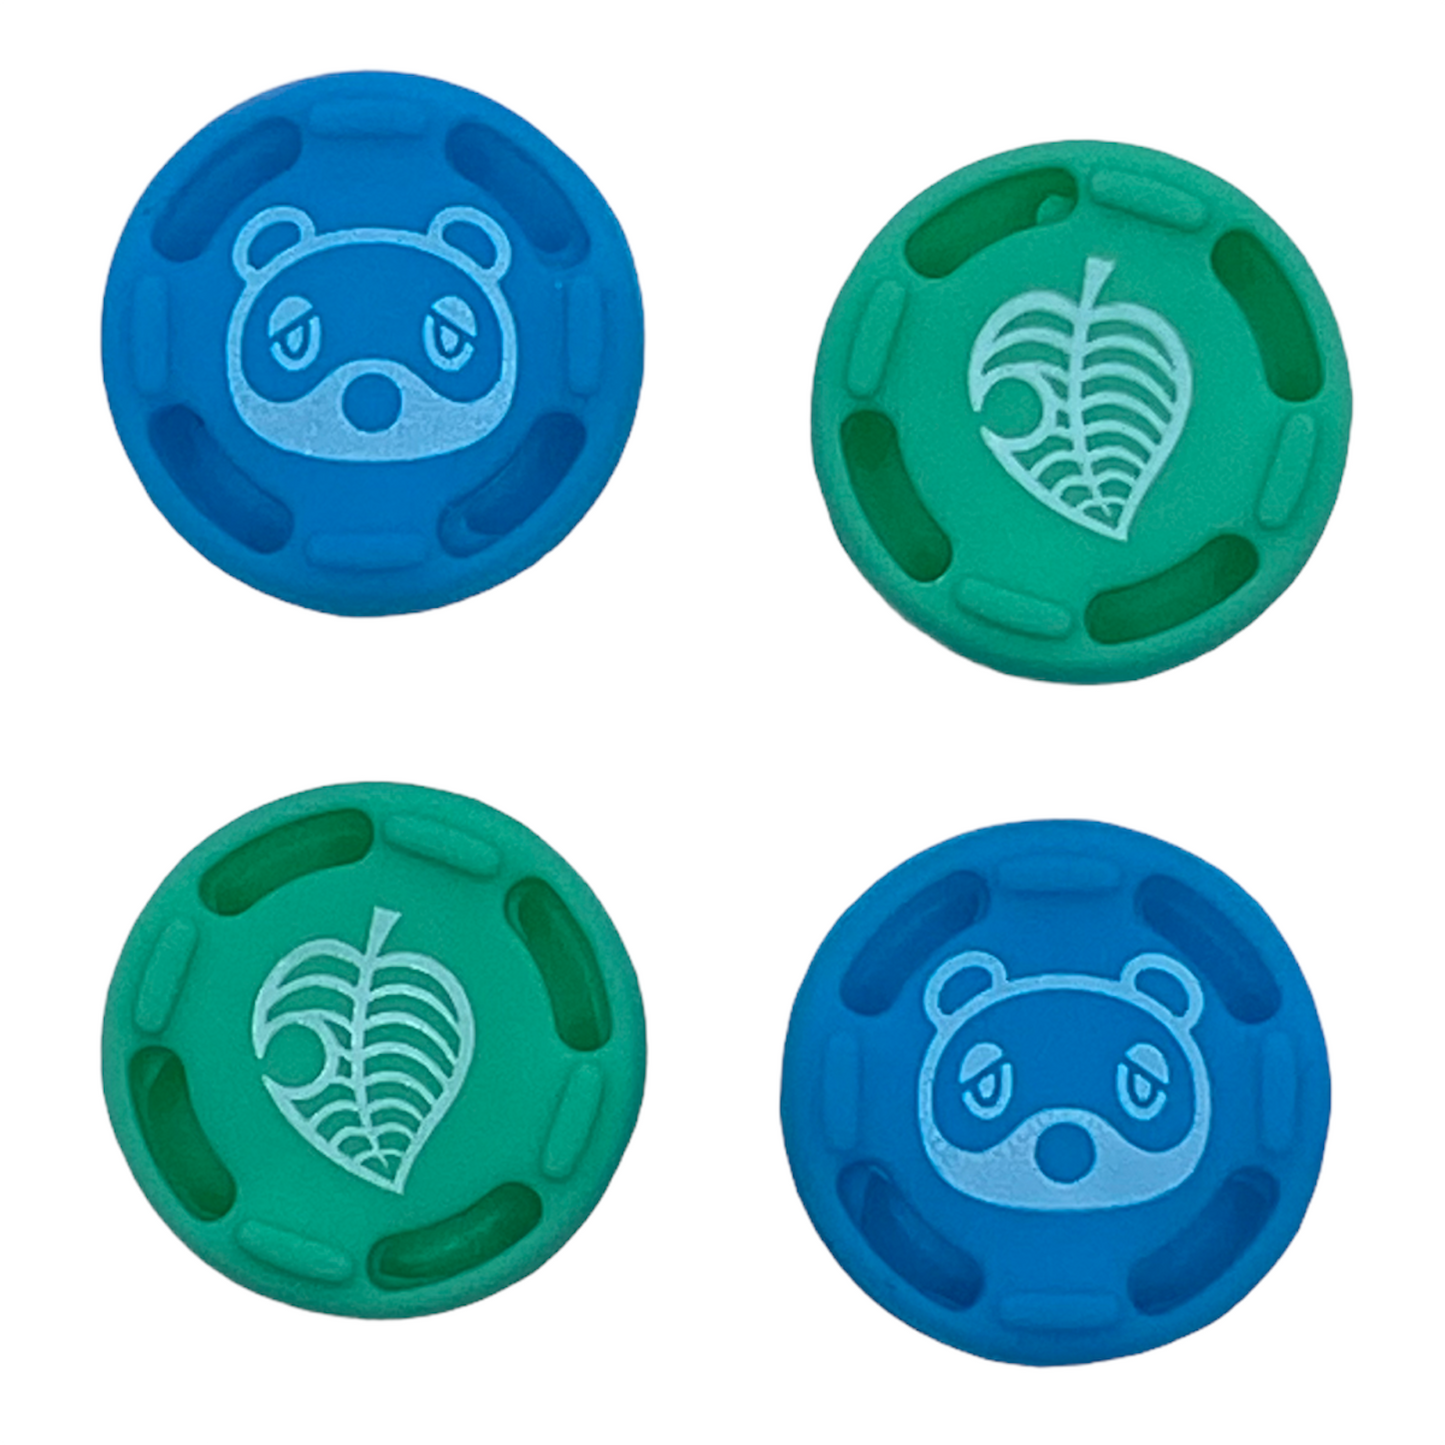 JenDore Blue Raccoon & Green LeafAnimal Crossing 4Pcs Silicone Thumb Grip Caps for Nintendo Switch